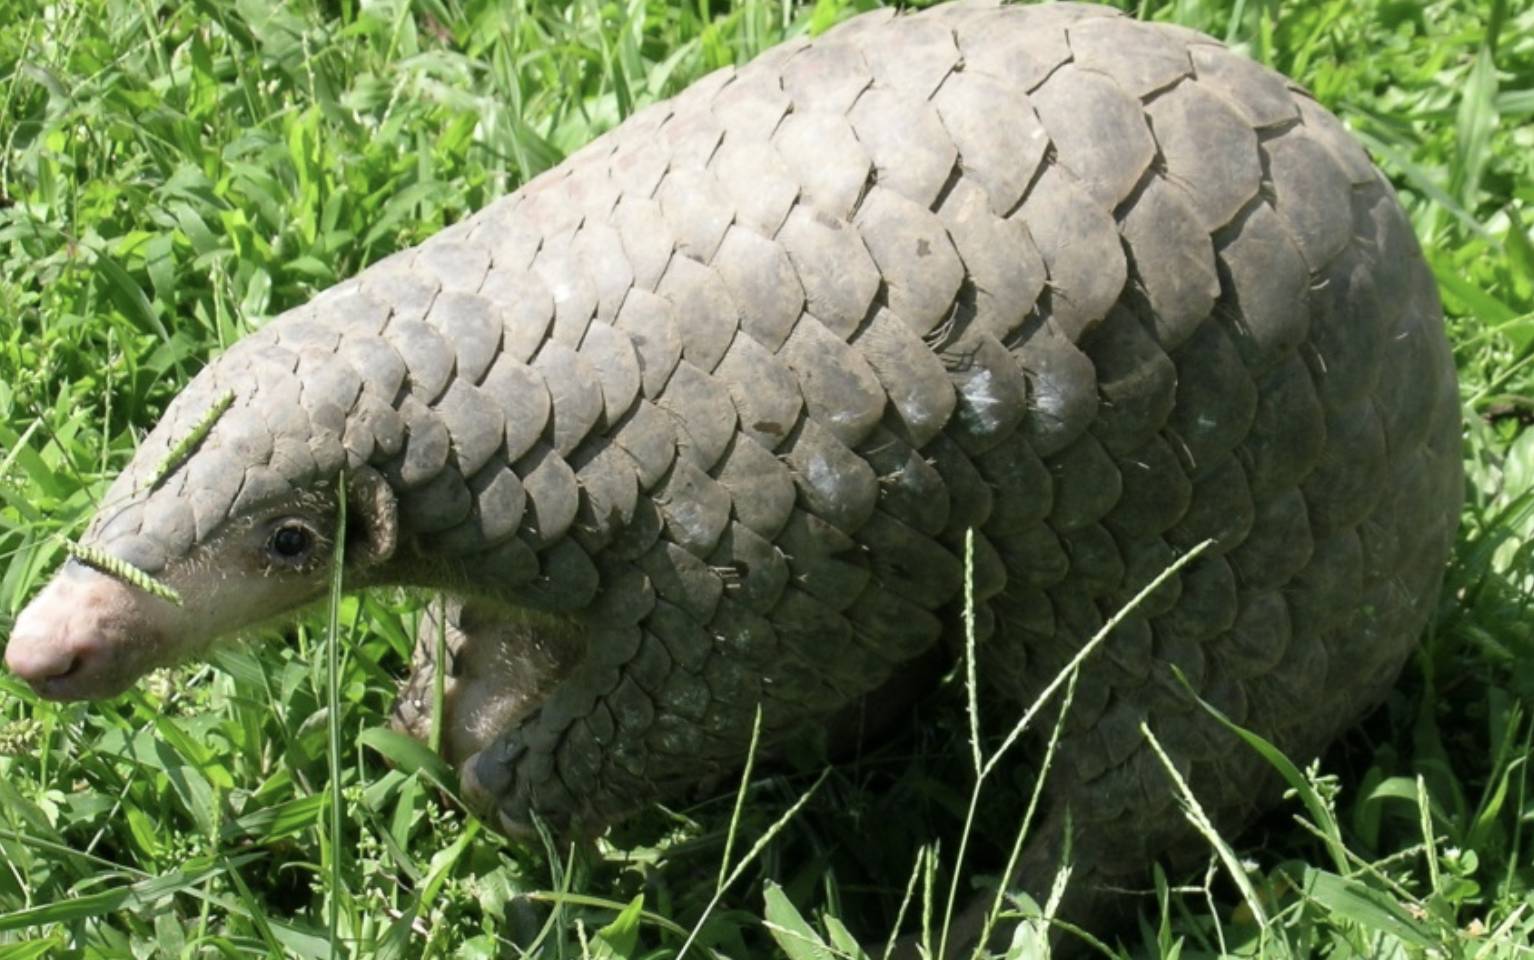 Pangolins are one known host for viruses similar to Covid-19.